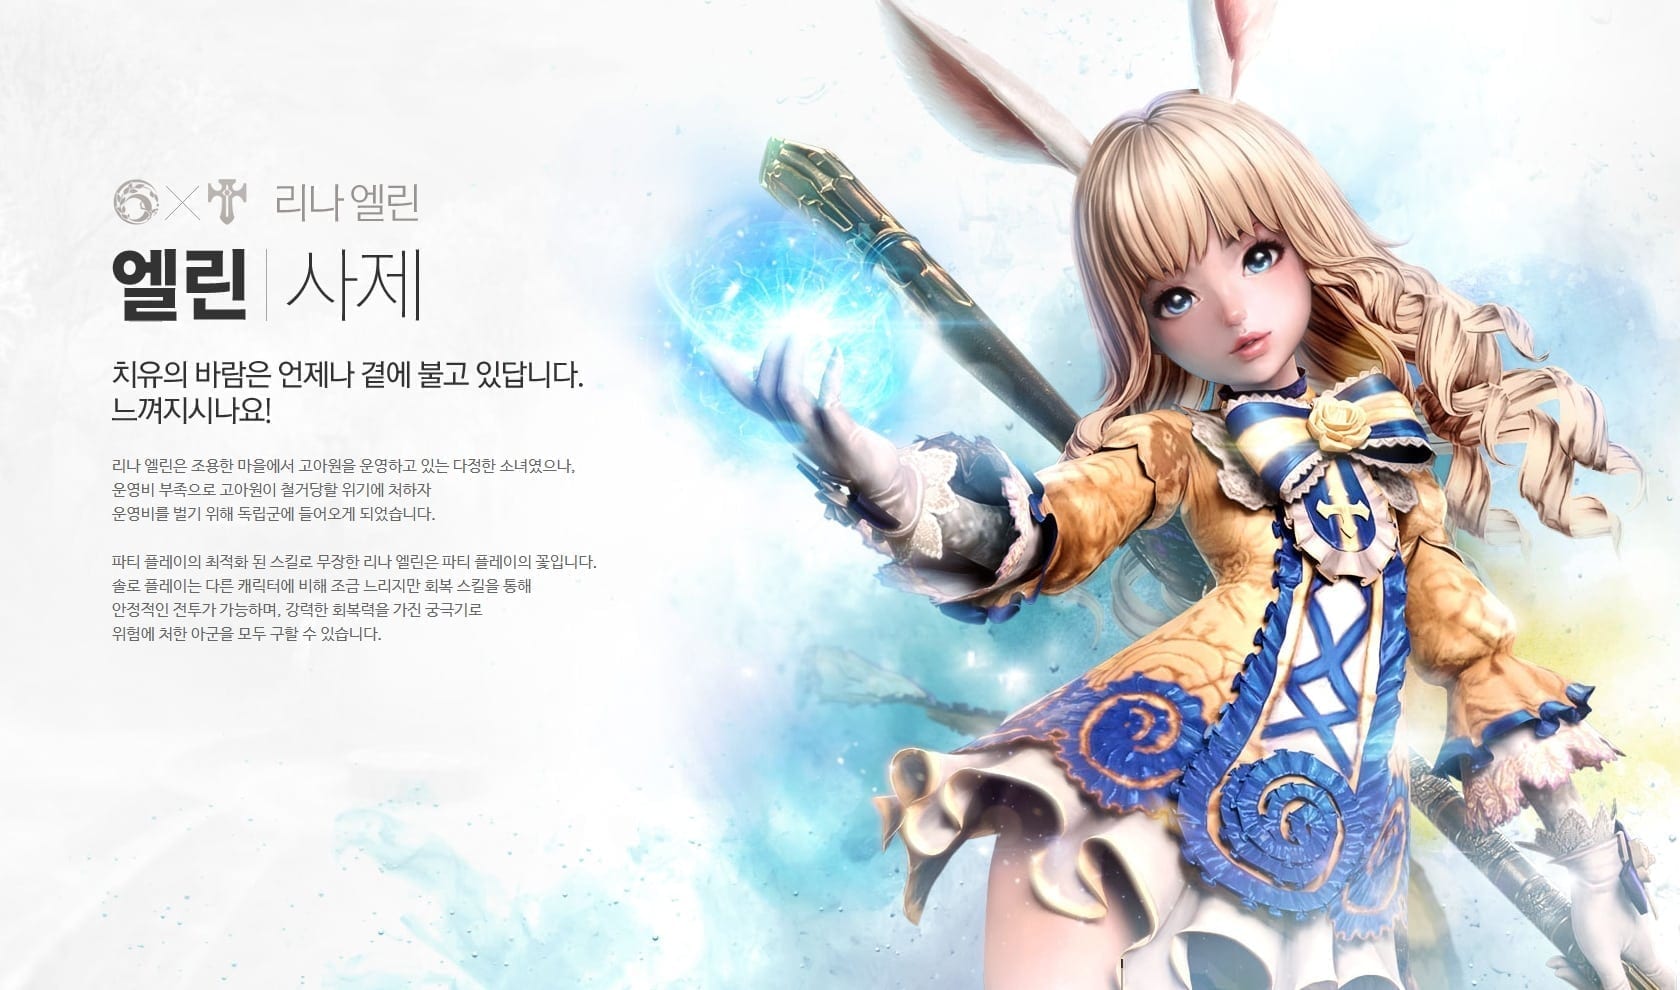 TERA M - Classes in upcoming action mobile MMORPG revealed - MMO Culture